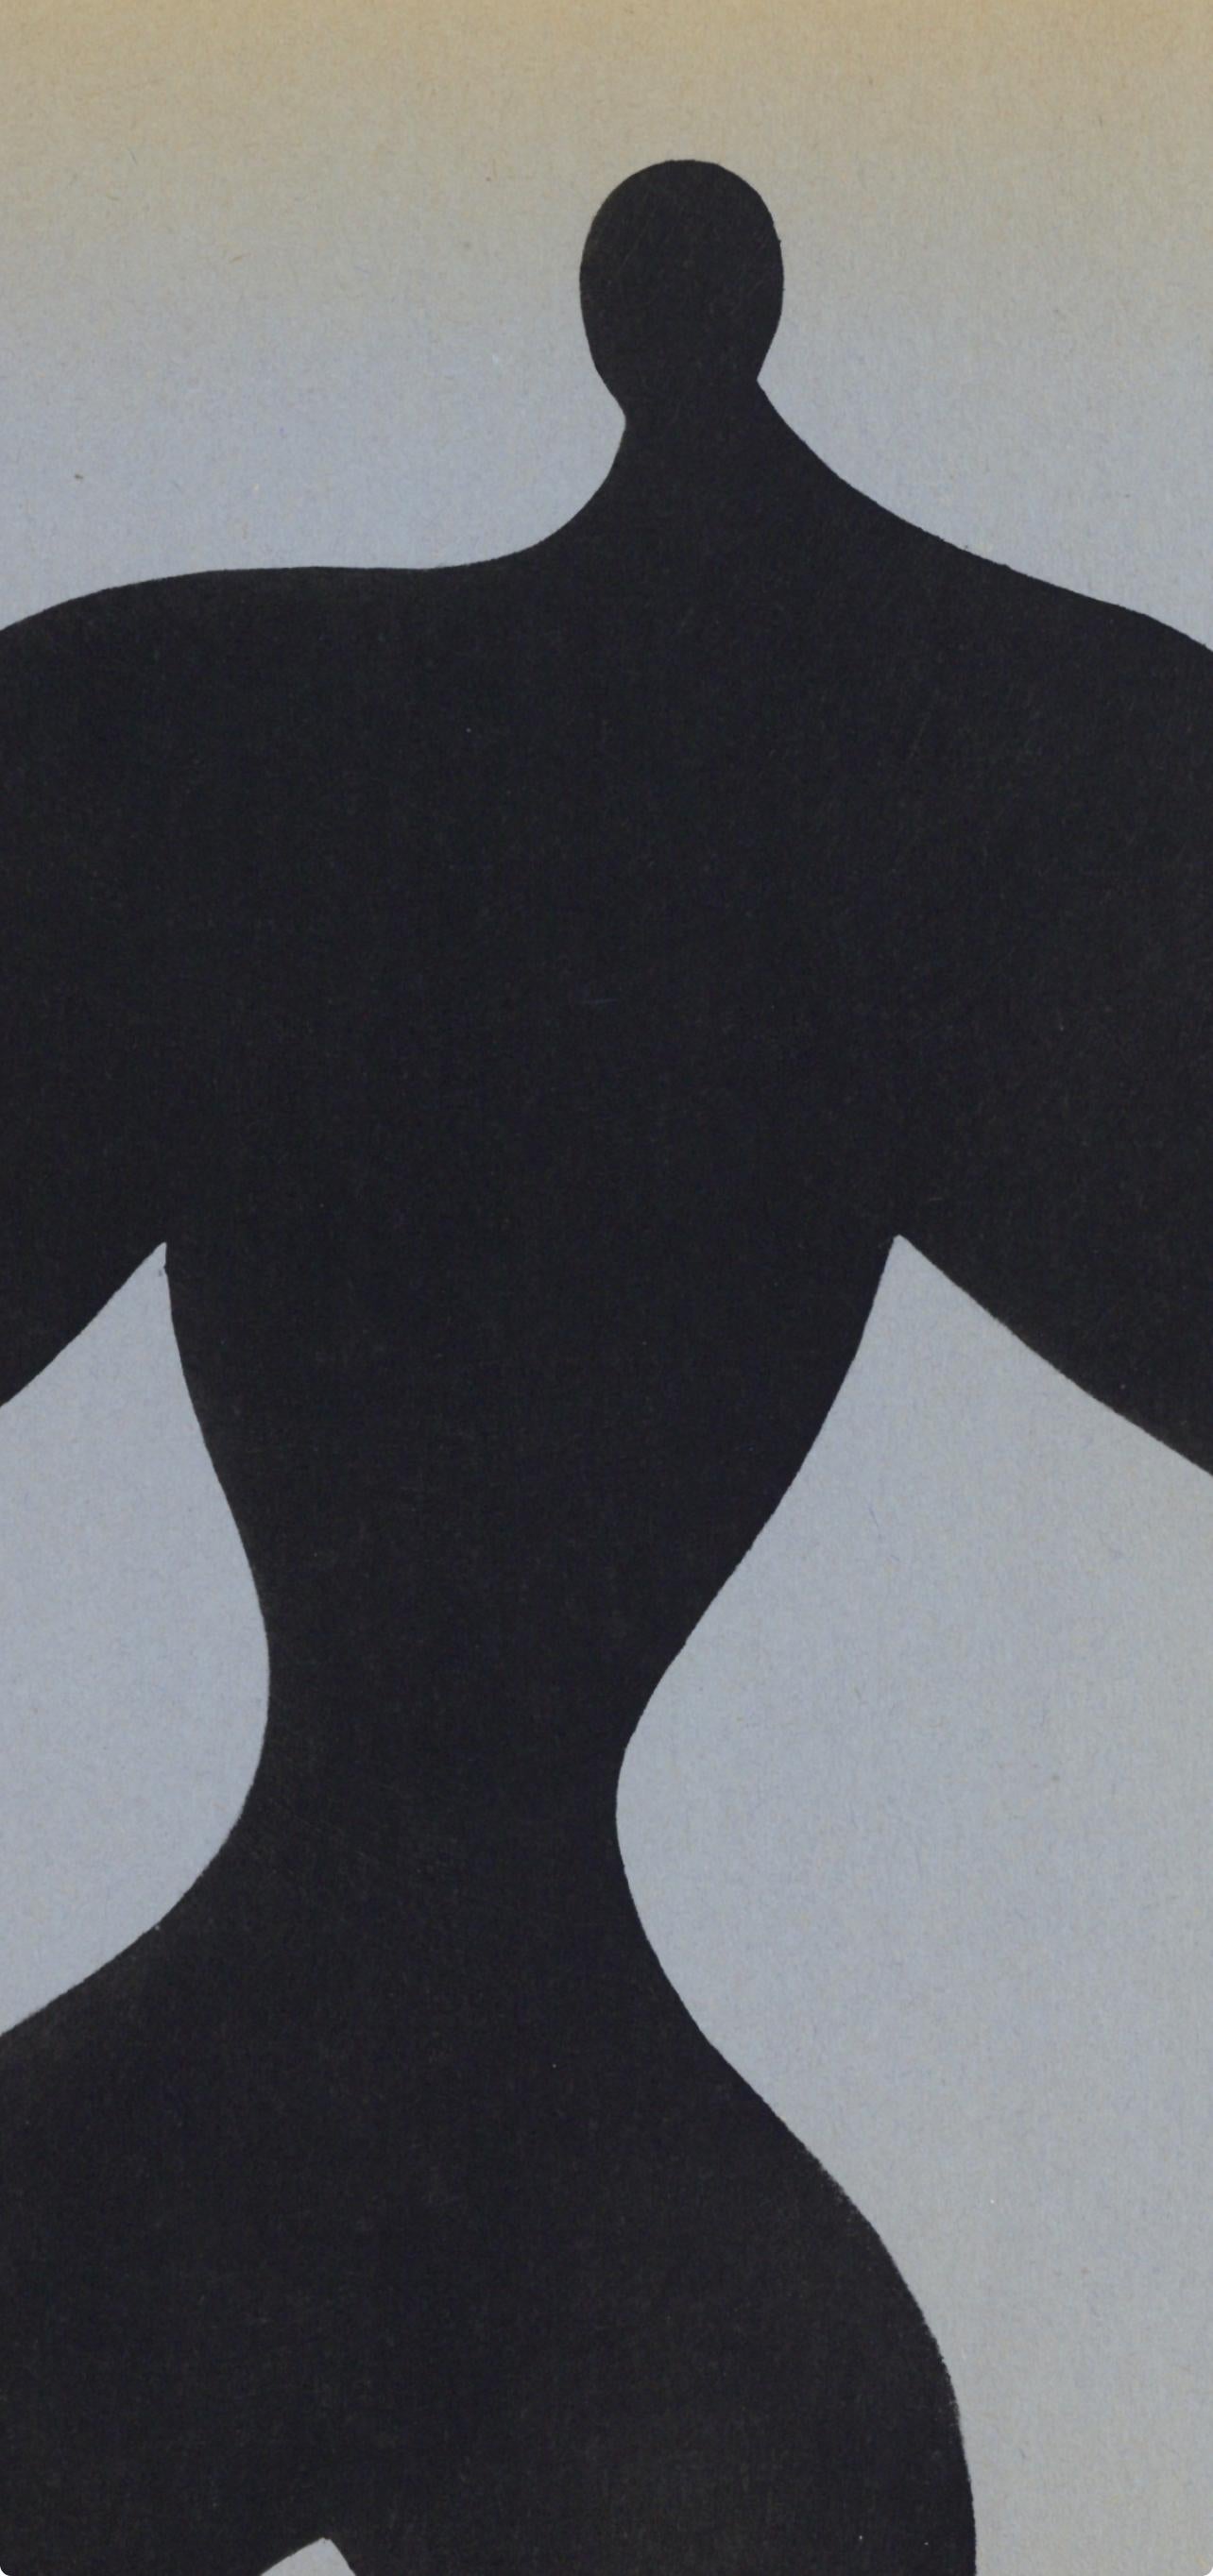 Arp, Personnages, XXe Siècle (after) - Print by Jean Arp